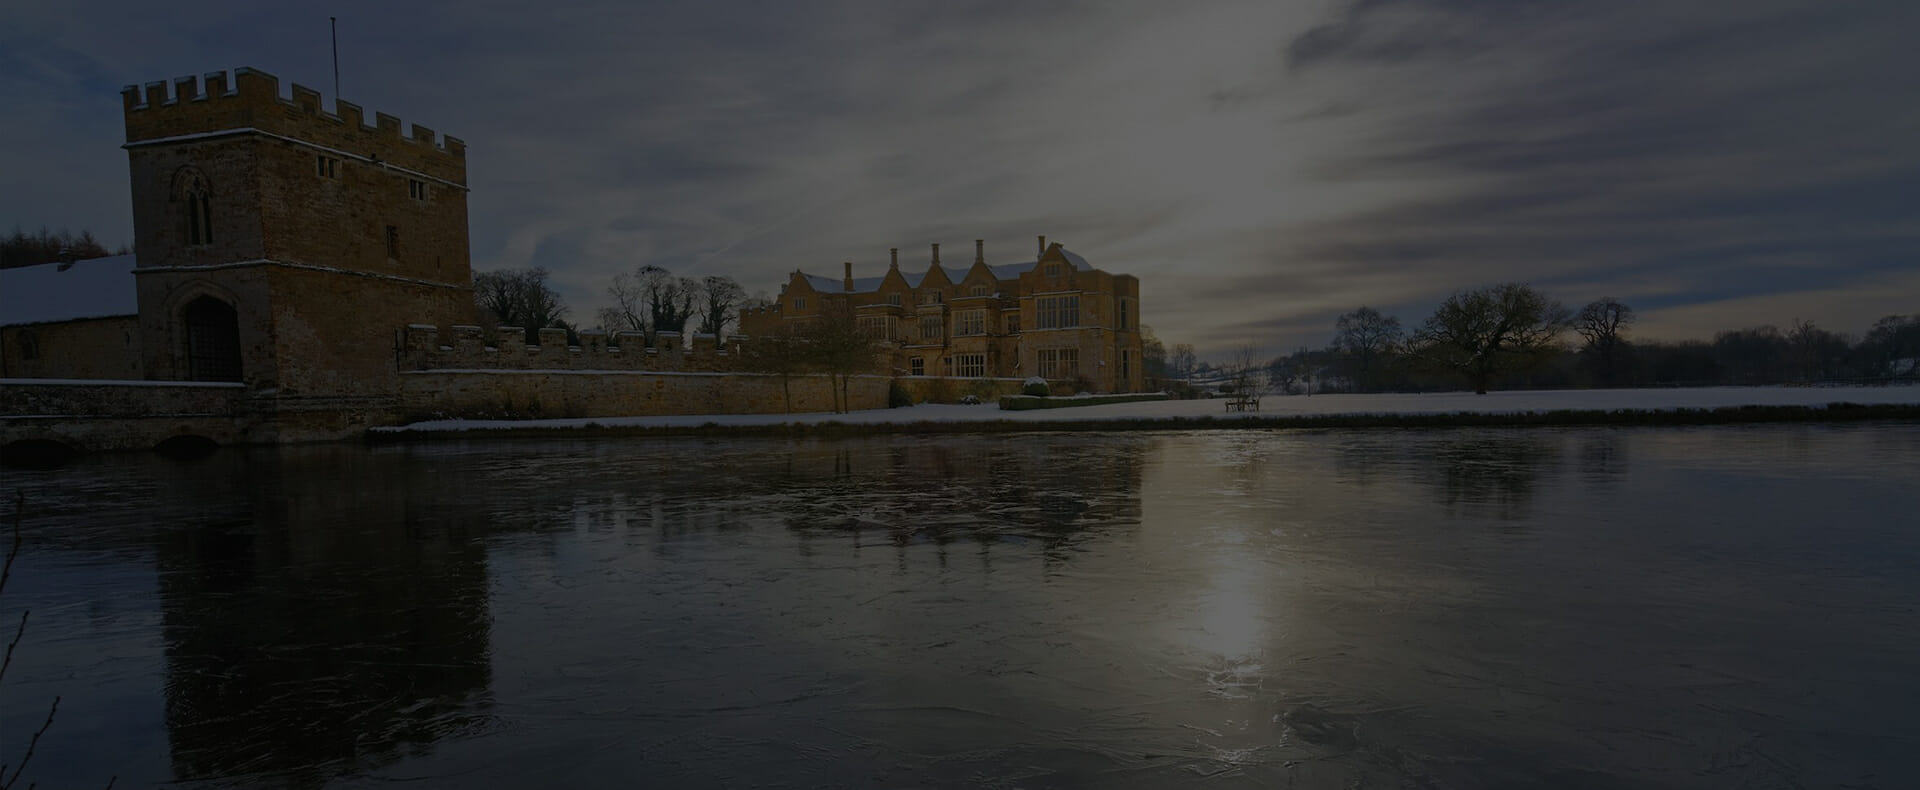 banbury broughton castle next to lake during winter with cloudy sky